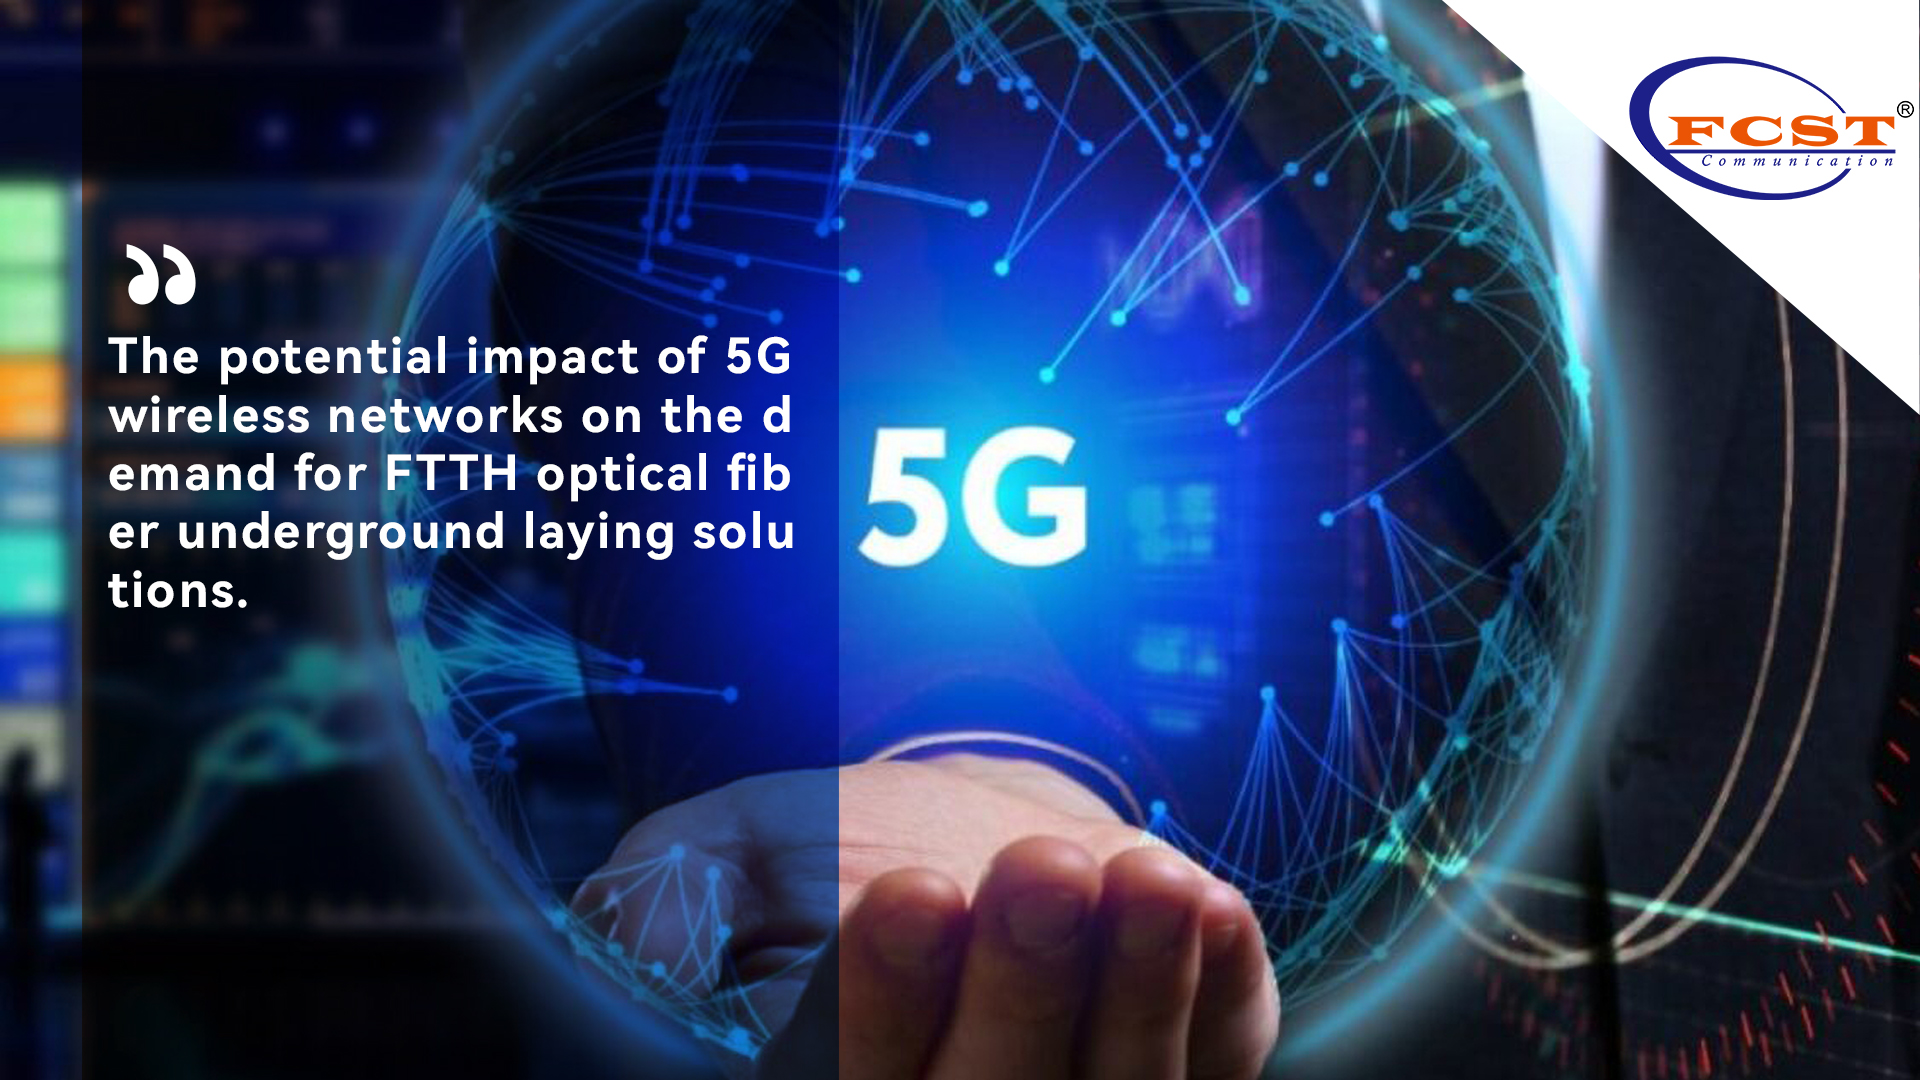 The potential impact of 5G wireless networks on the demand for FTTH optical fiber underground laying solutions.